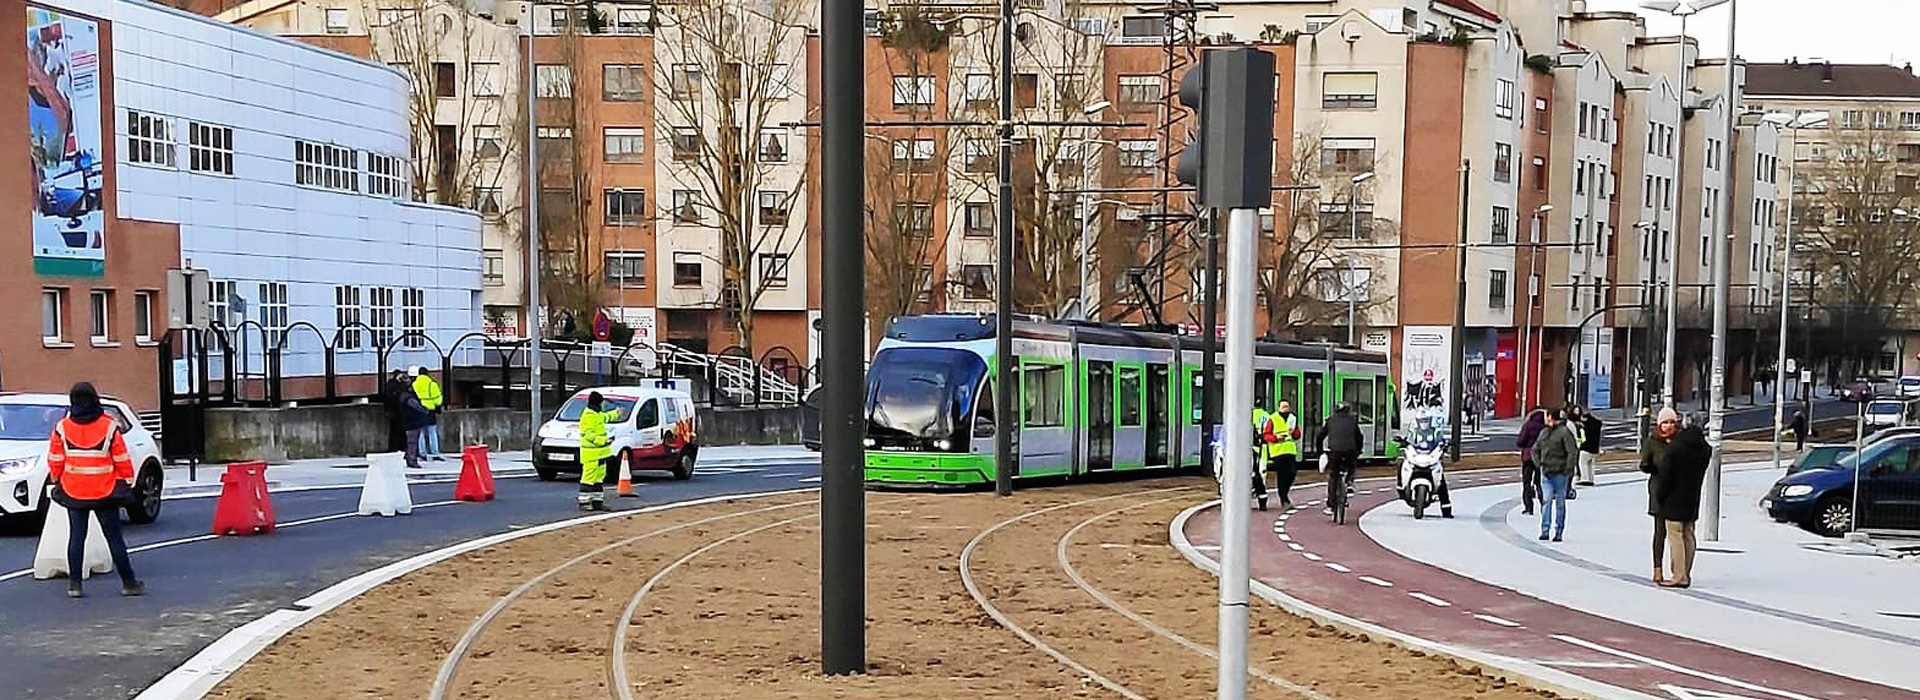 SOUTHERN EXTENSION OF VITORIA-GASTEIZ TRAMWAY TO THE UNIVERSITY - 2